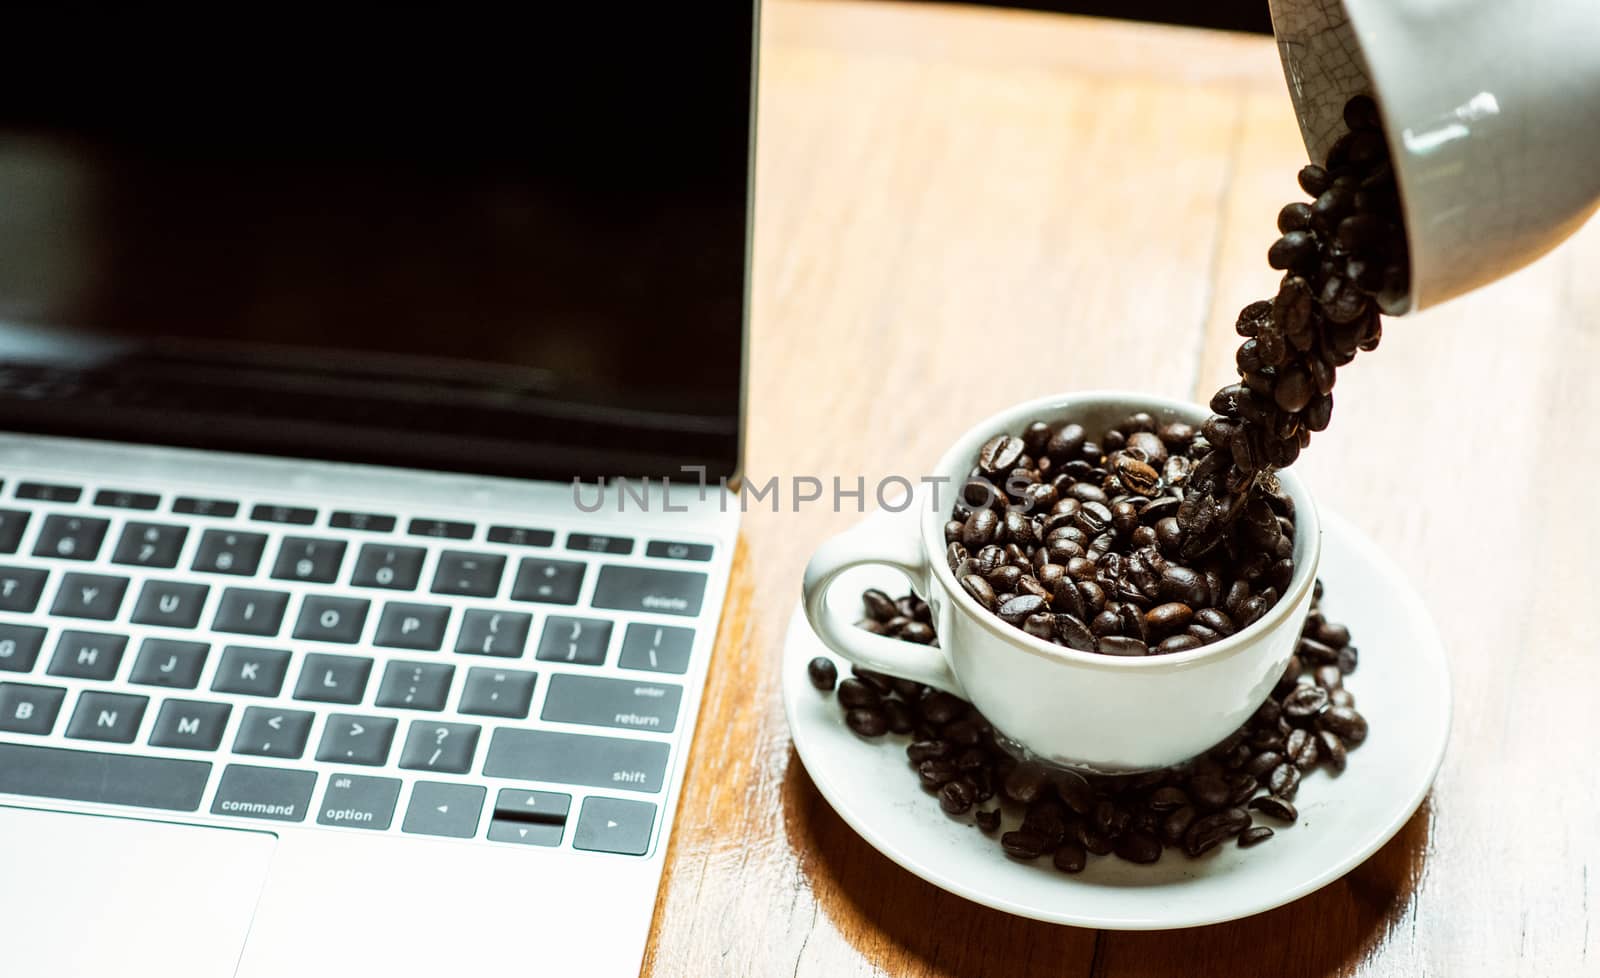 Workplace business laptop computer have coffee drop into cup, in coffee shop